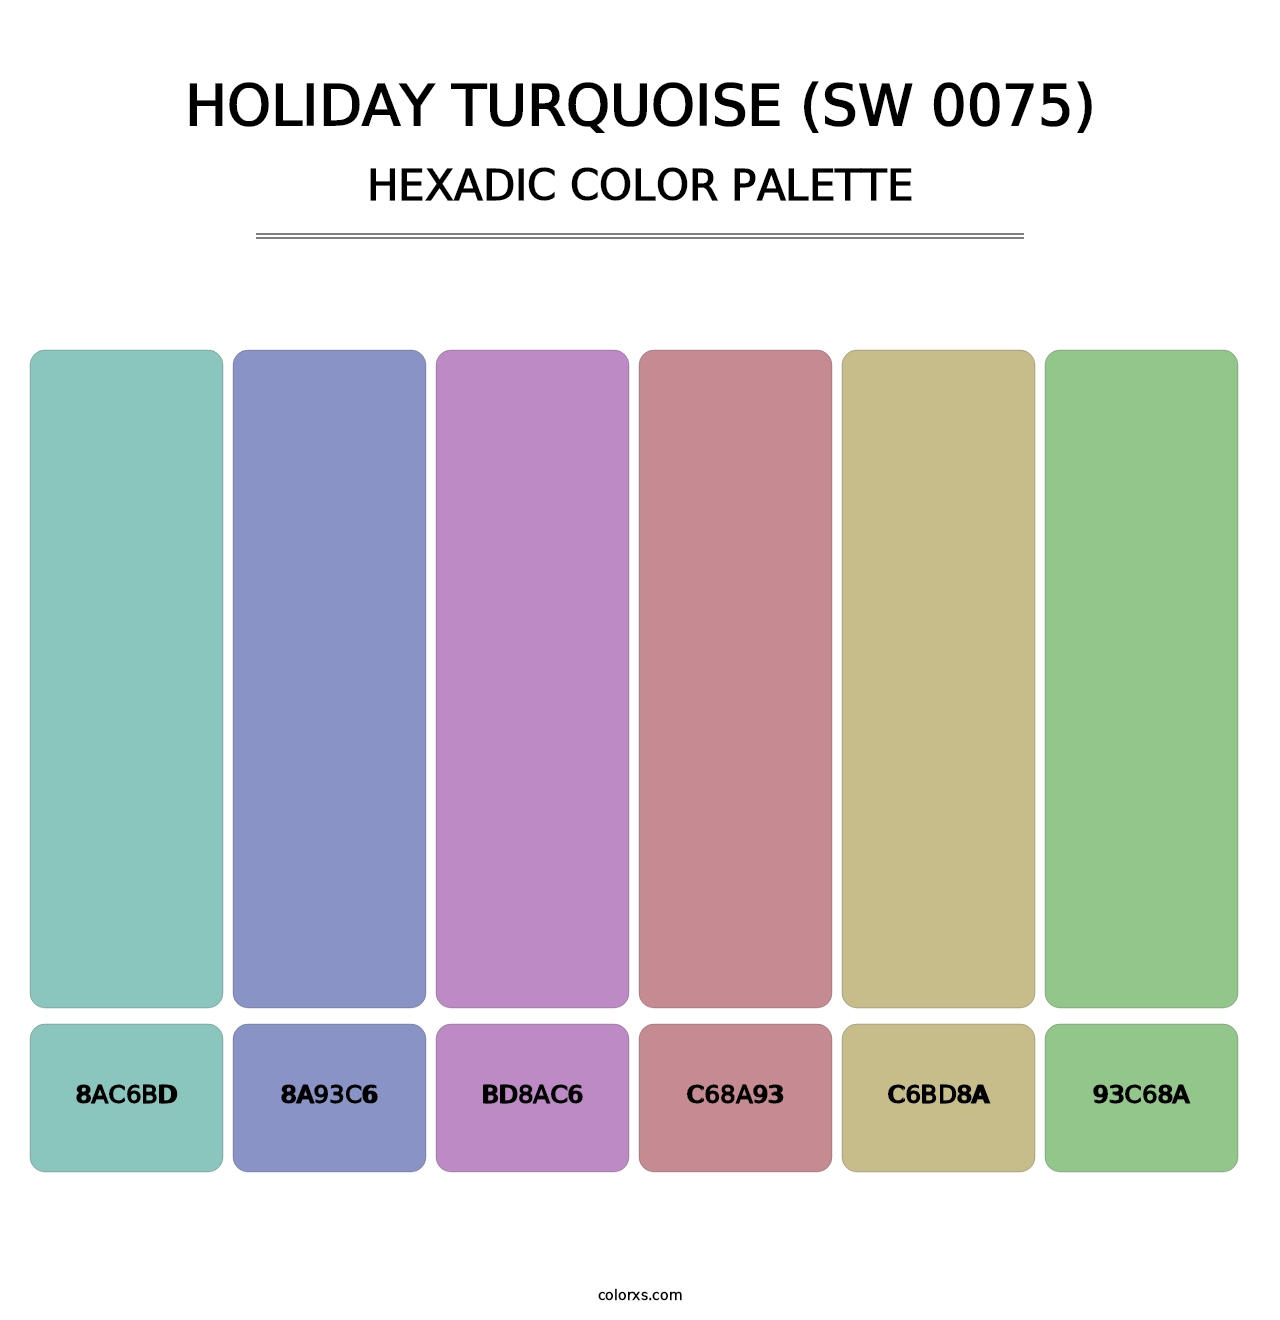 Holiday Turquoise (SW 0075) - Hexadic Color Palette